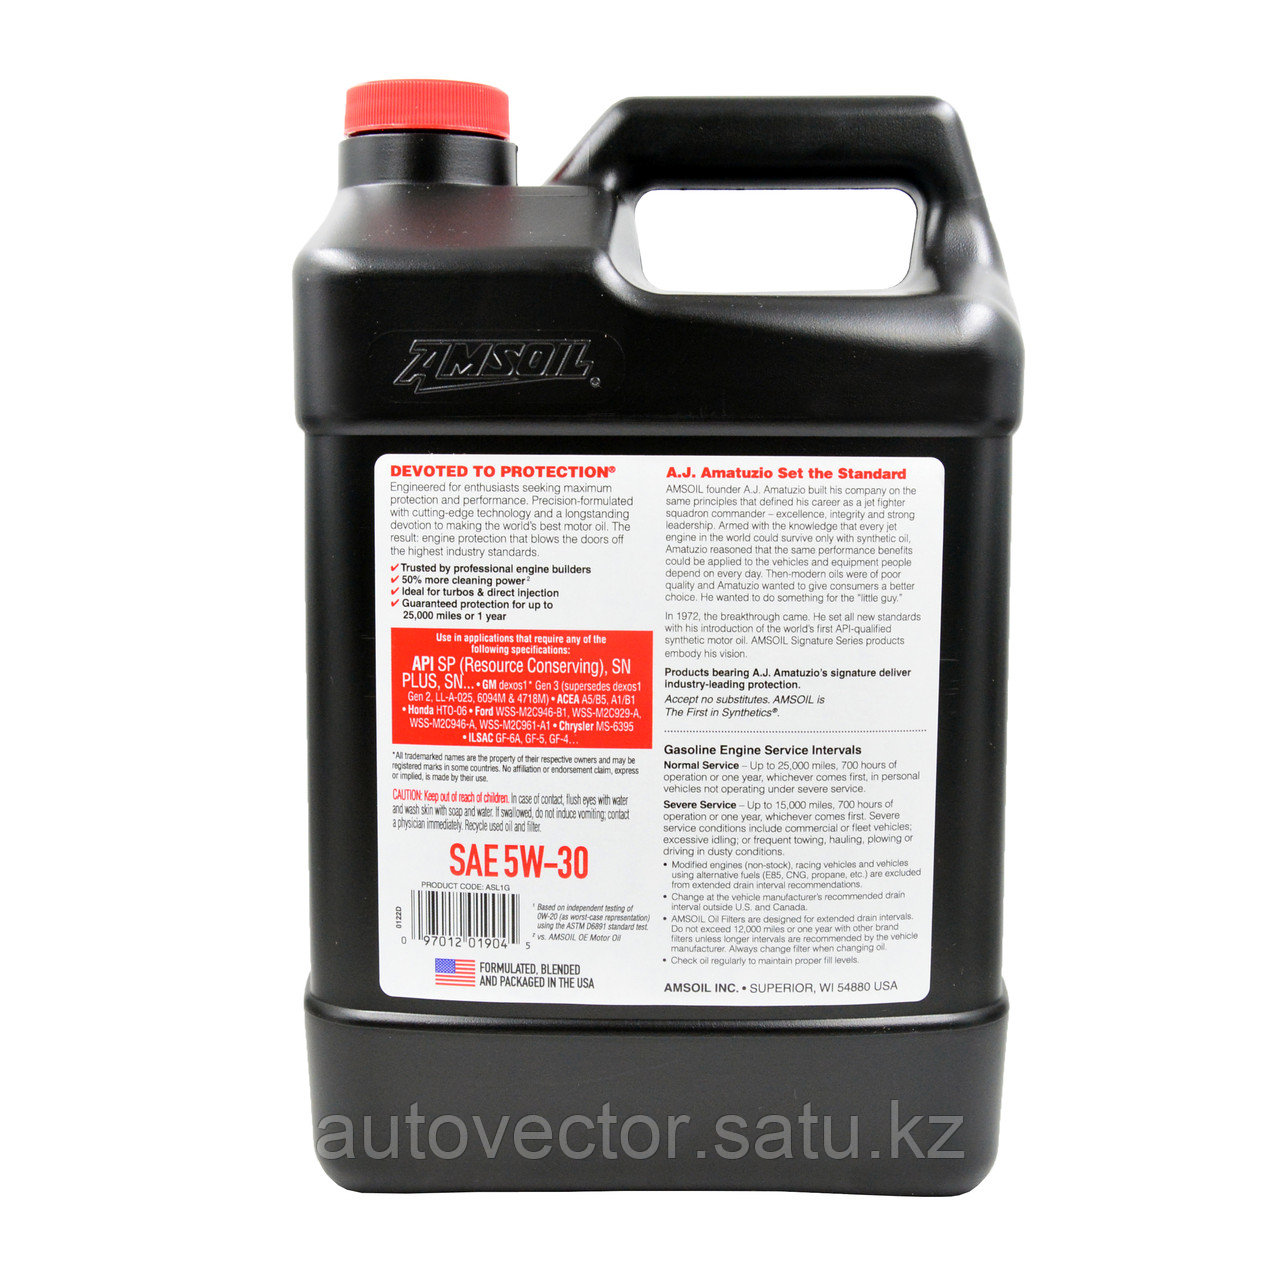 Моторное масло AMSOIL Signature Series 5W-30 Synthetic Motor Oil 3.78L - фото 2 - id-p114207479